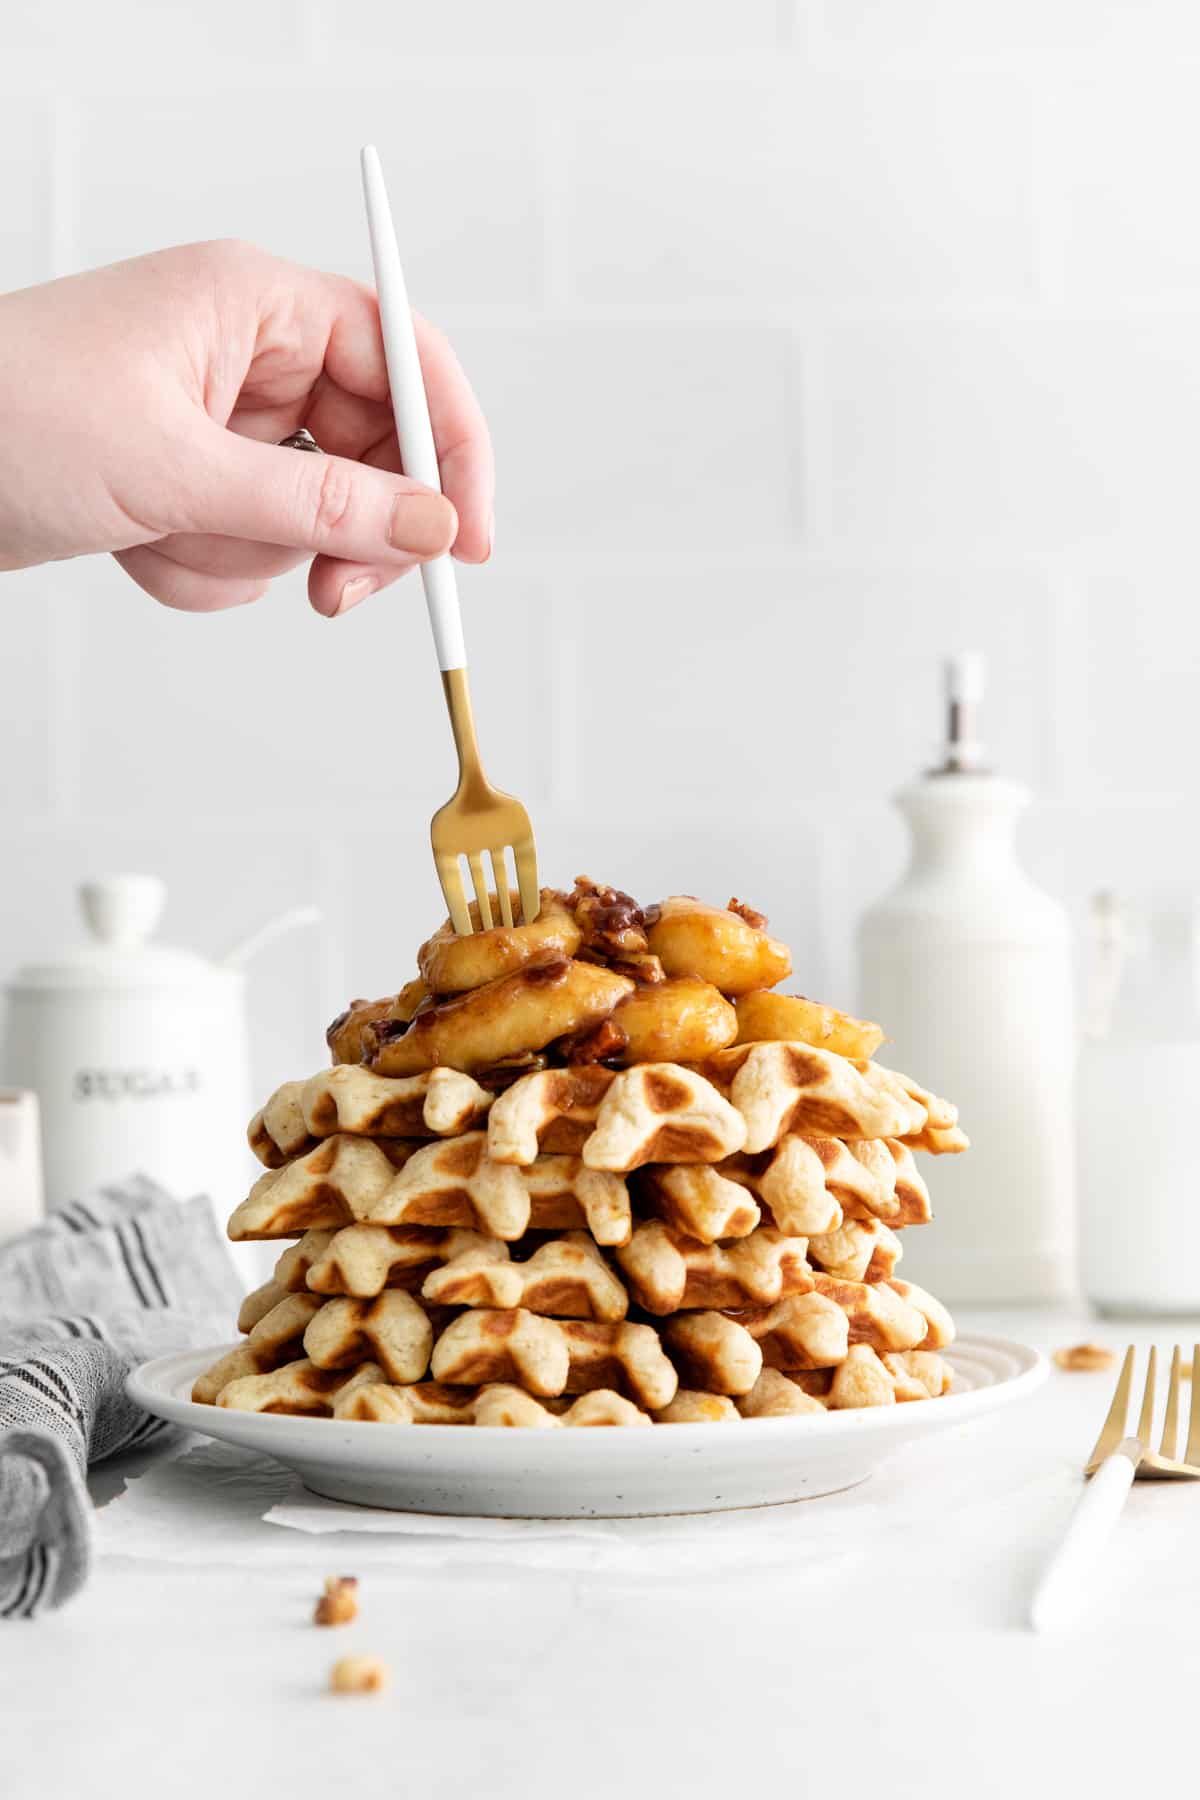 hand holding a fork as it pokes into the banana topping on the waffles